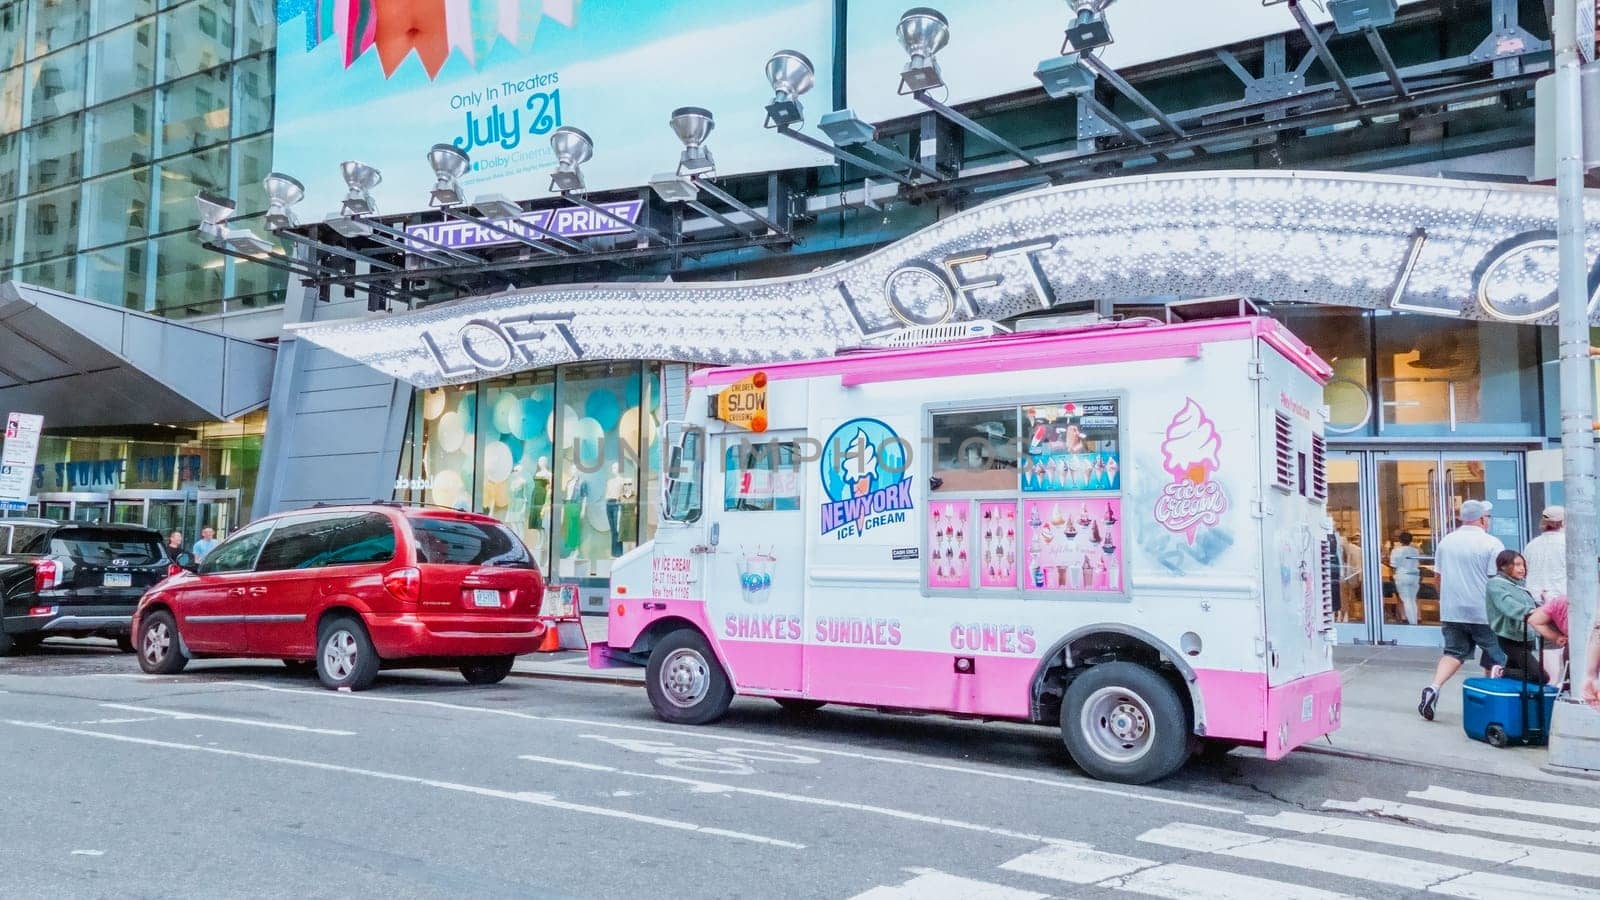 The truck is decorated with colorful lights and has a large sign on the side that says Ice Cream. There are people walking past the truck, and cars are parked on the street behind it.